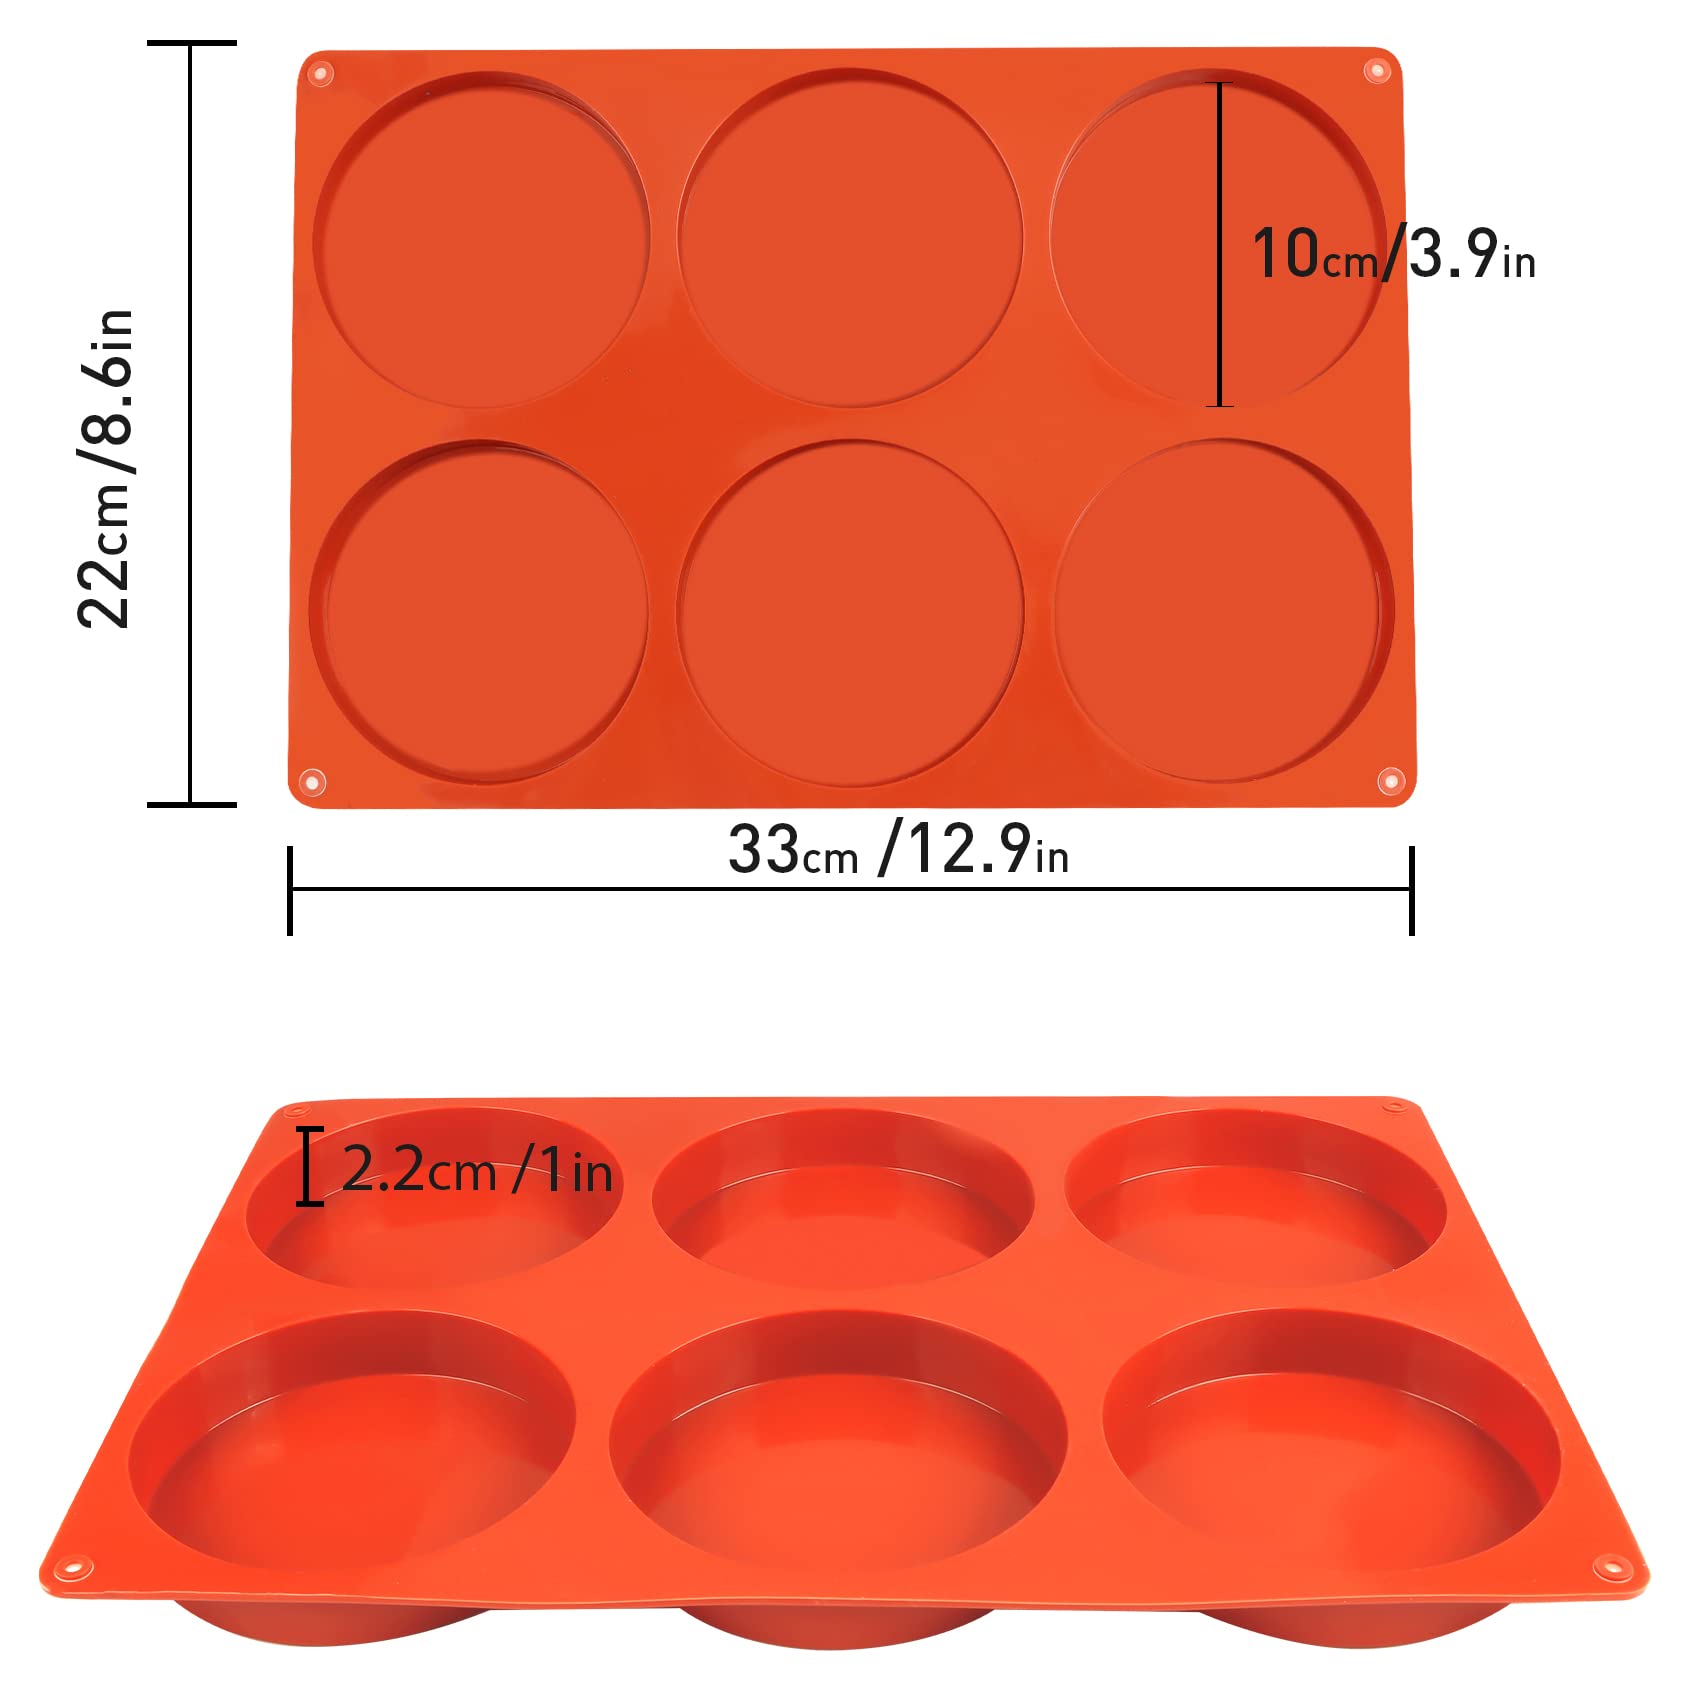 2 Pcs Large Silicone Molds for Baking, 6-Cavity Round Silicone Baking Mold, Non-Stick 4” Baking Disc Molds for Whoopie Pie, Egg Pan,Muffin, Candy, Soap, Hamburger, Resin Coasters (Red)